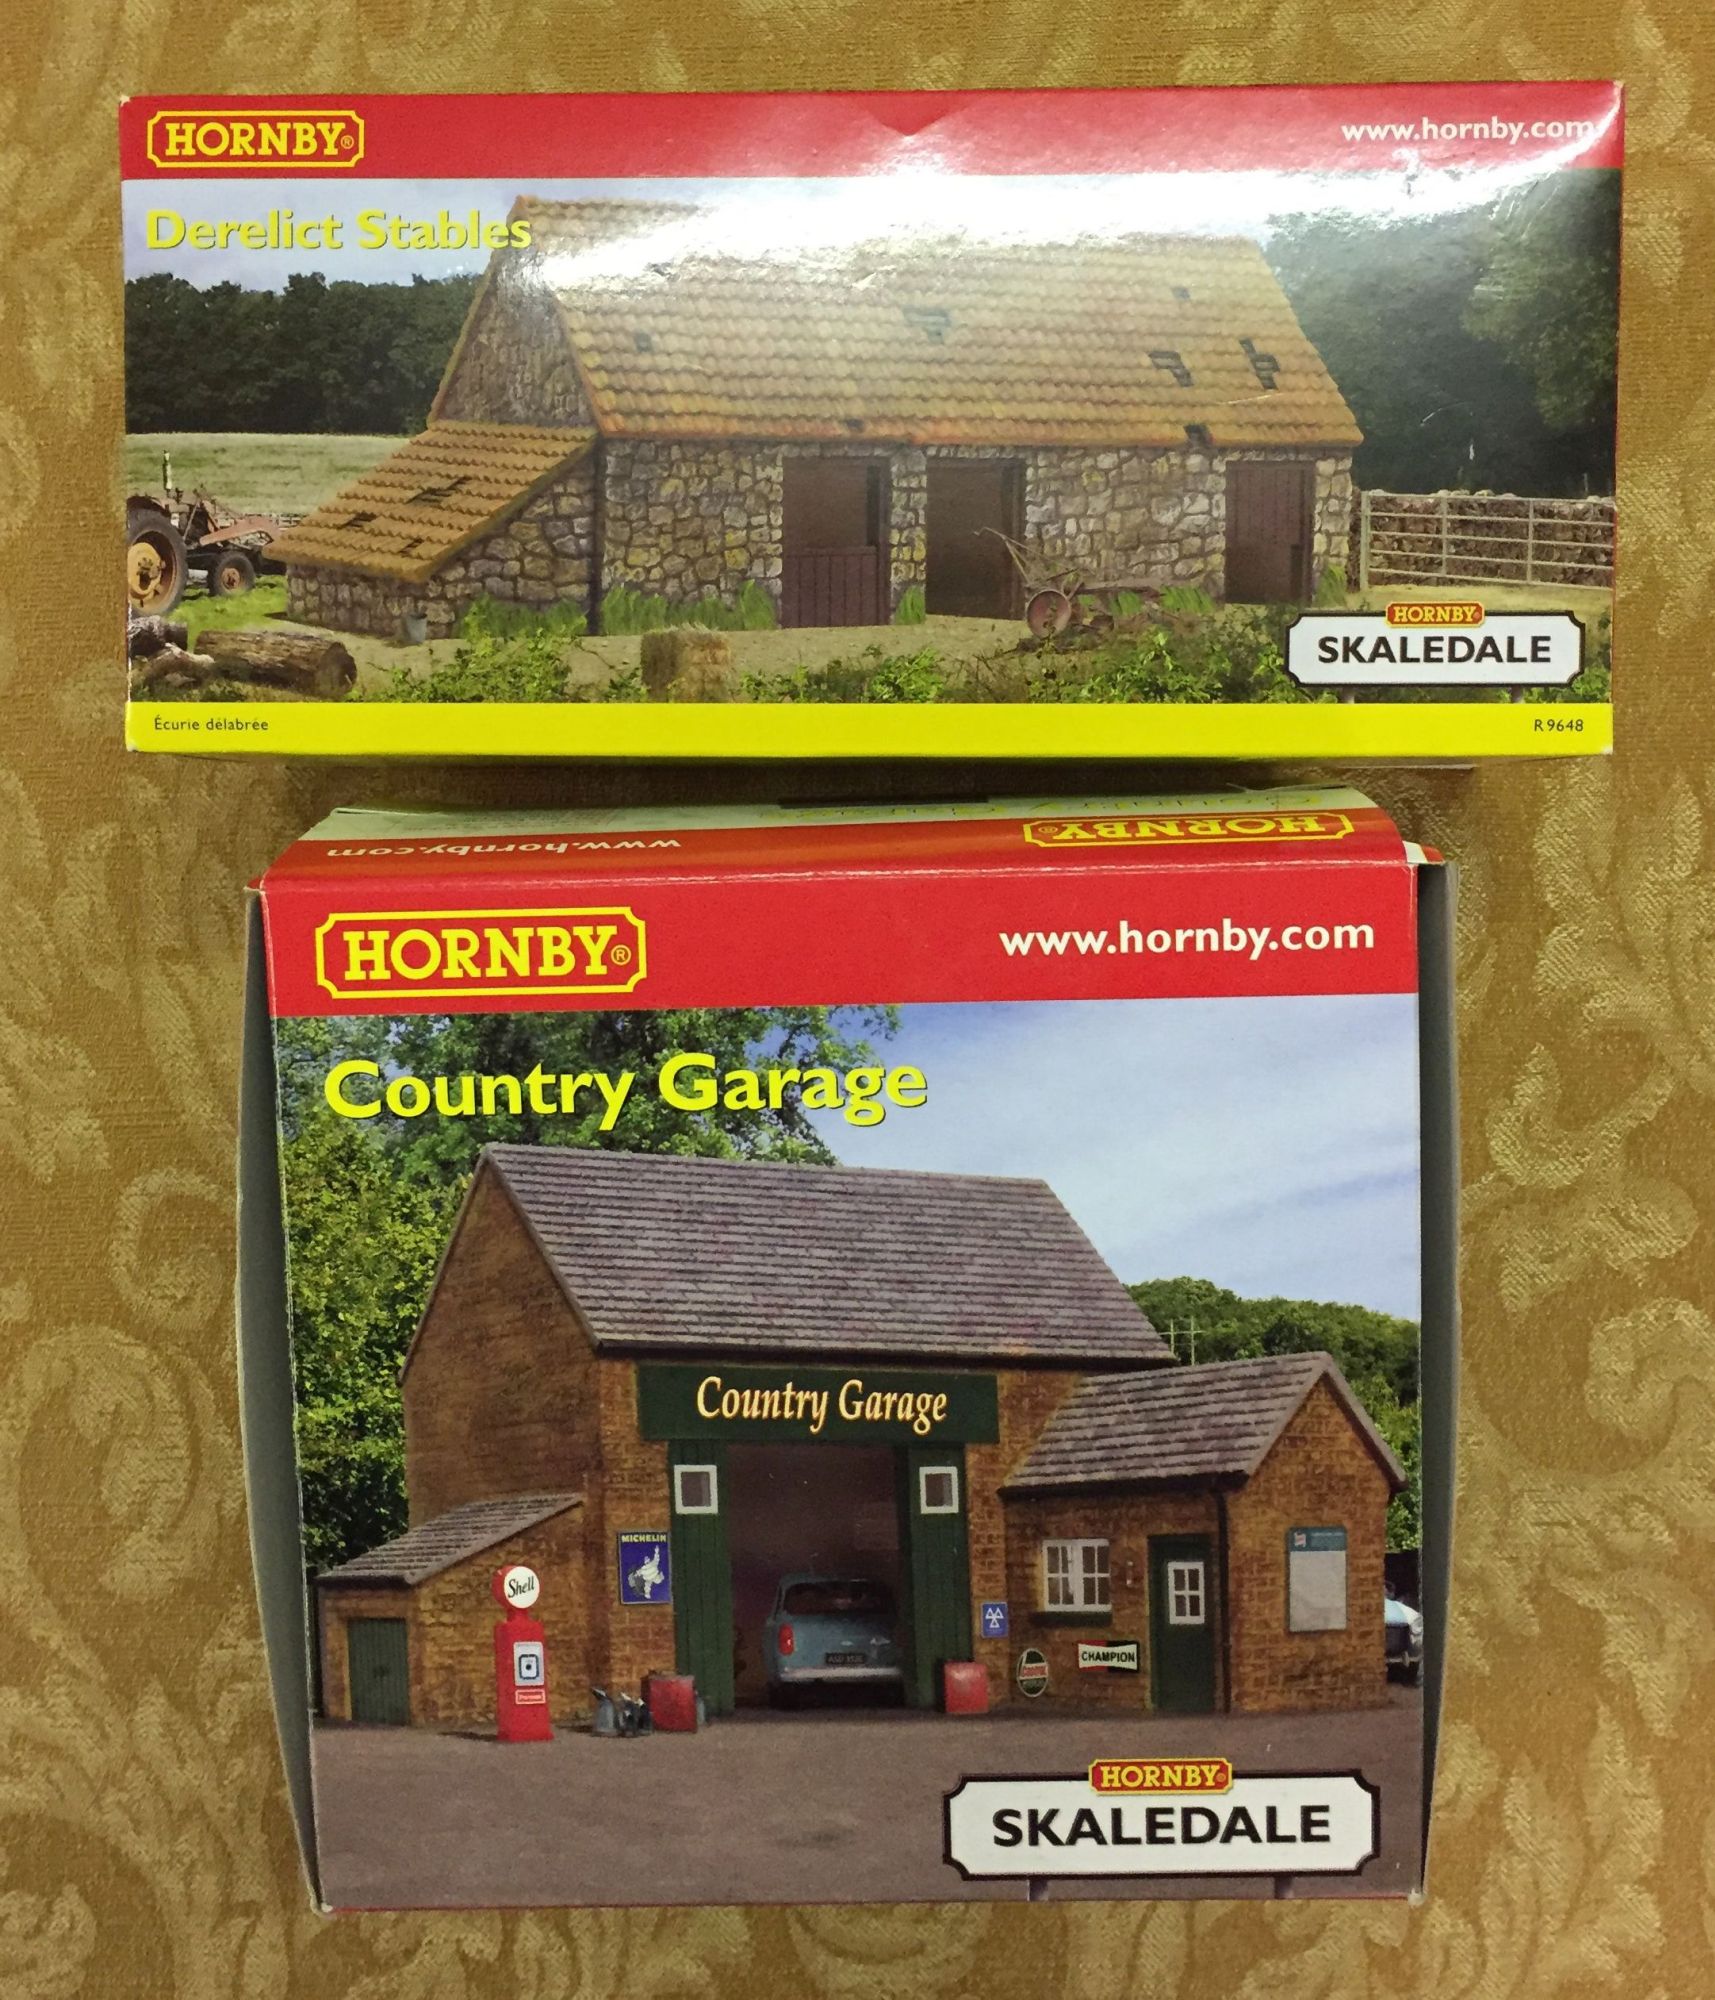 2 Hornby resin models in original boxes - Derelict Stables and Country Garage.